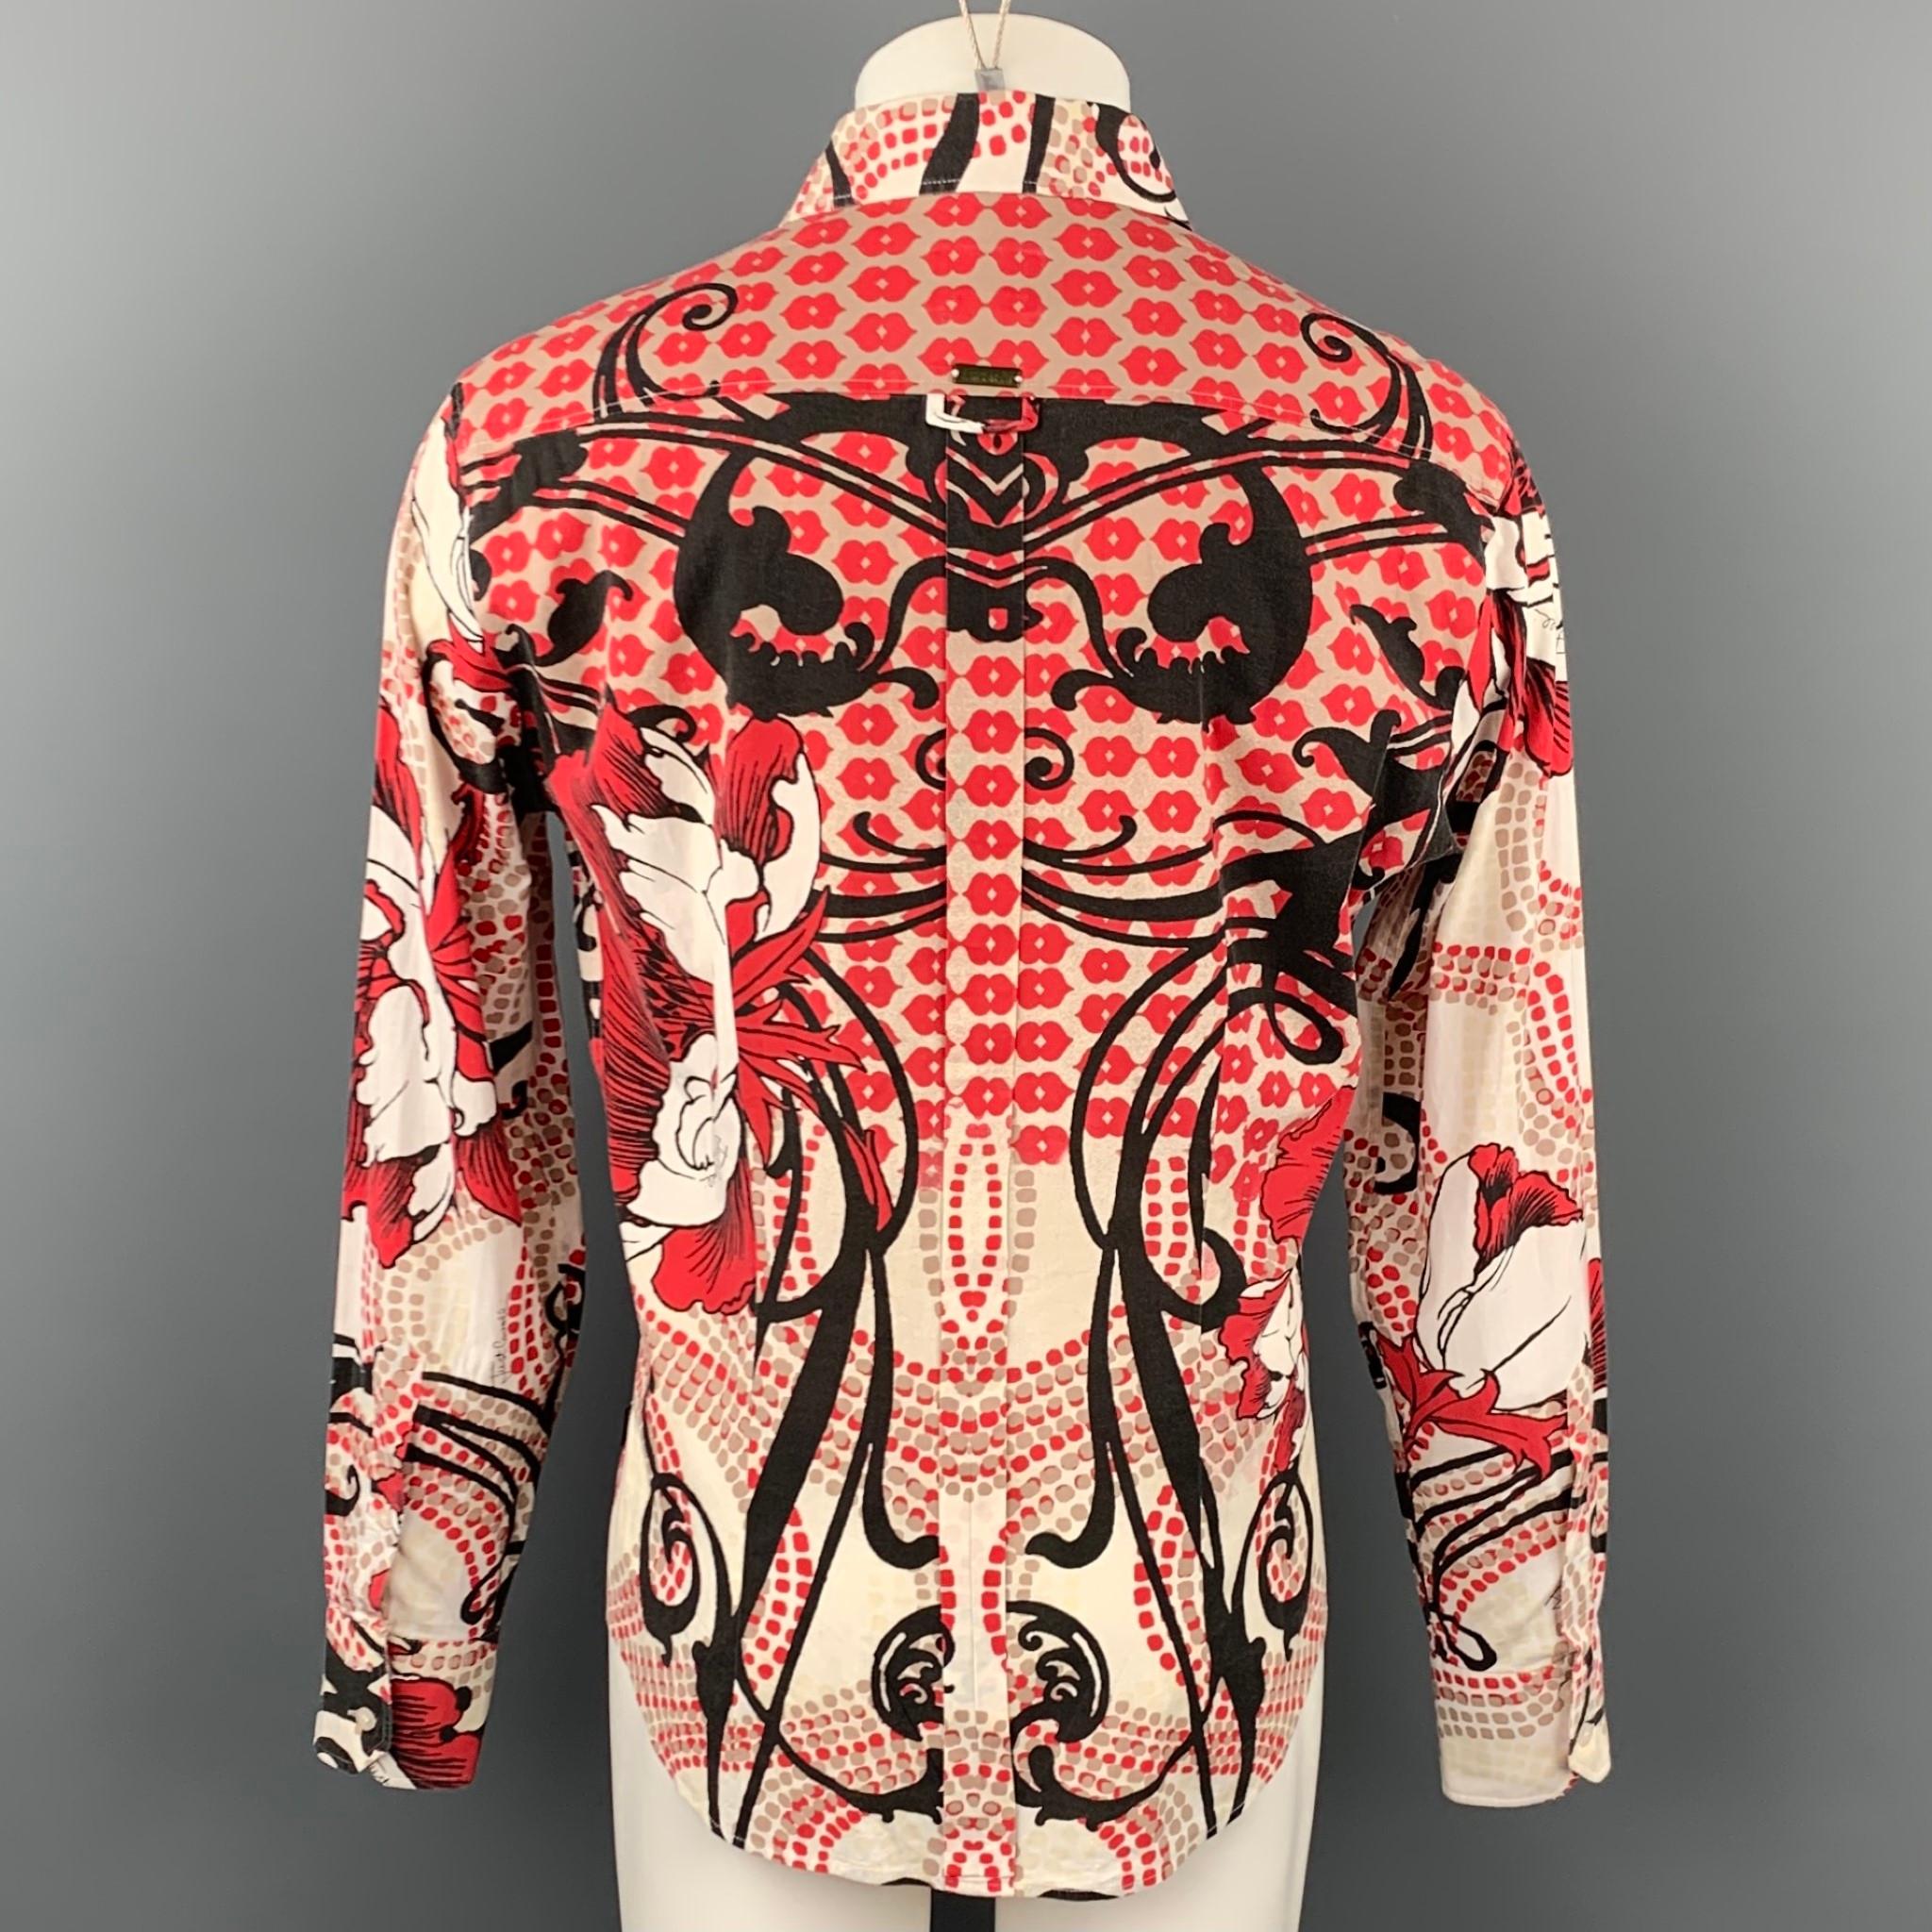 Beige JUST CAVALLI Size XL White & Red Print Cotton Button Up Long Sleeve Shirt